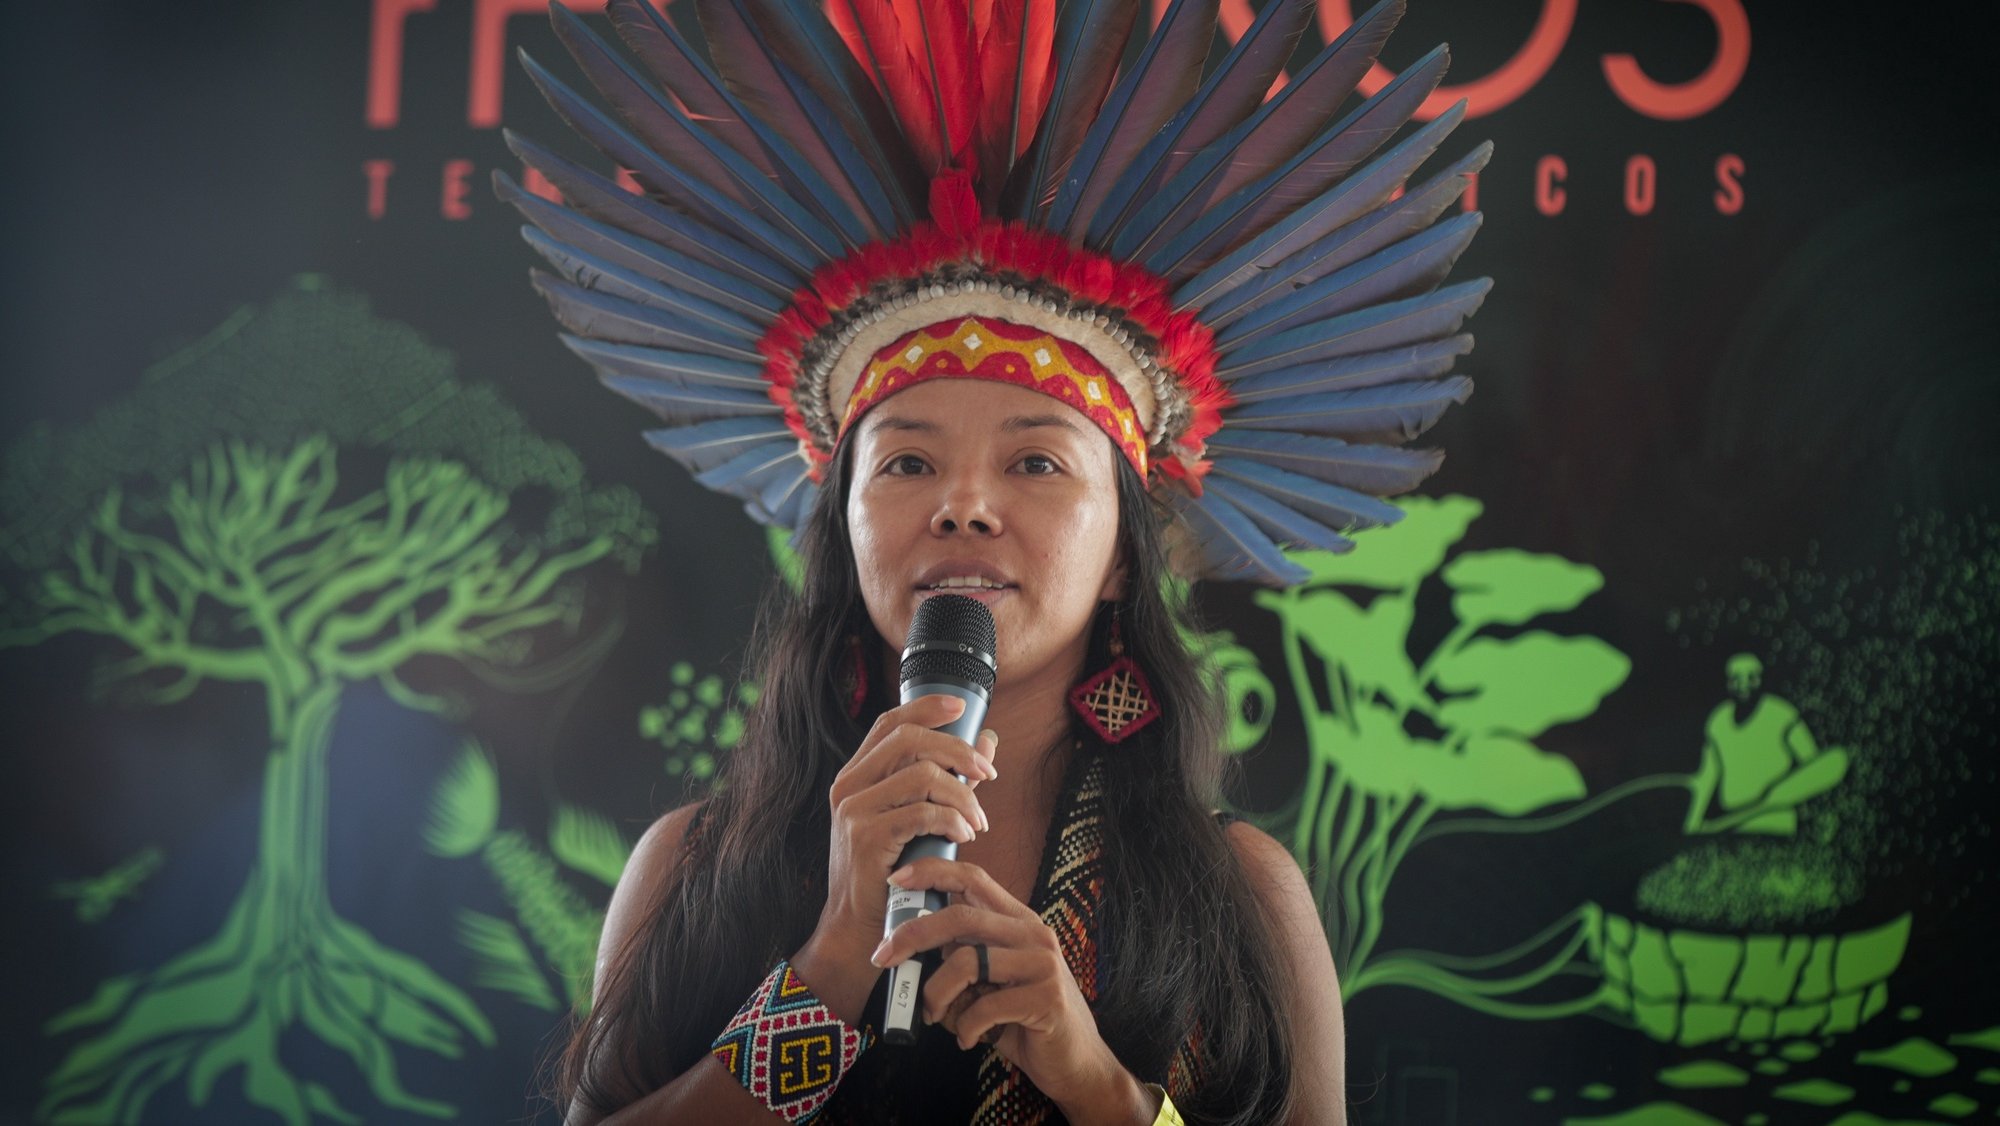 epa09646880 Indigenous Vanda Ortega, from the Witoto people, speaks during the opening of the exhibition 'Fruturos - Tempos Amazonicos' (Fruits - Amazon Times) at the Amanha Museum in Rio de Janeiro, Brazil, 16 December 2021 (issued 17 December 2021). The immensity of the Amazon, its richness, the ethnic groups that live there and their customs, are part of an exhibition in Rio de Janeiro that from 17 December on immerses the viewer in the reality of the most extensive tropical forest on the planet to highlight the urgency of its conservation. The exhibition 'Futures', which can be seen until June 2022 at the Museum of Tomorrow in Rio, brings an updated perspective of this biome and proposes new challenges to keep the forest standing.  EPA/Andre Coelho